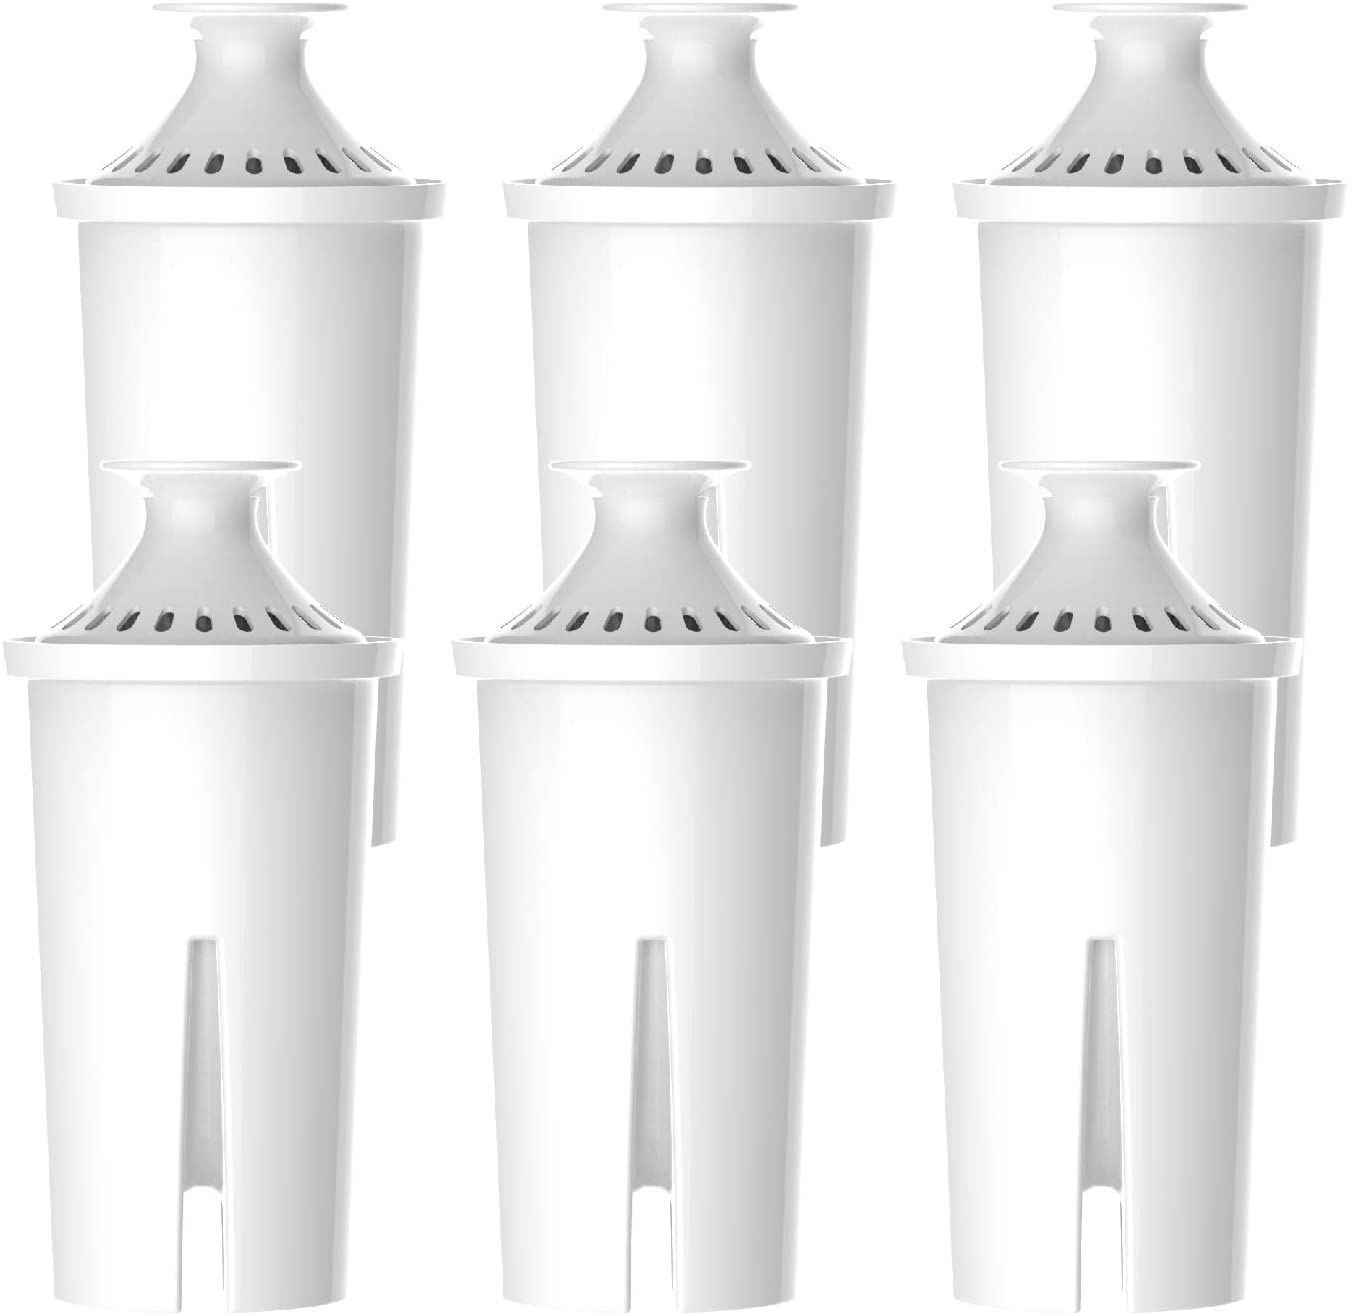 Waterspecialist NSF Certified Pitcher Water Filter, Replacement for Brita classic 35557, OB03, Mavea 107007, Compatible with Brita Pitchers Grand, Lake, Capri, Wave and More (Pack of 6)